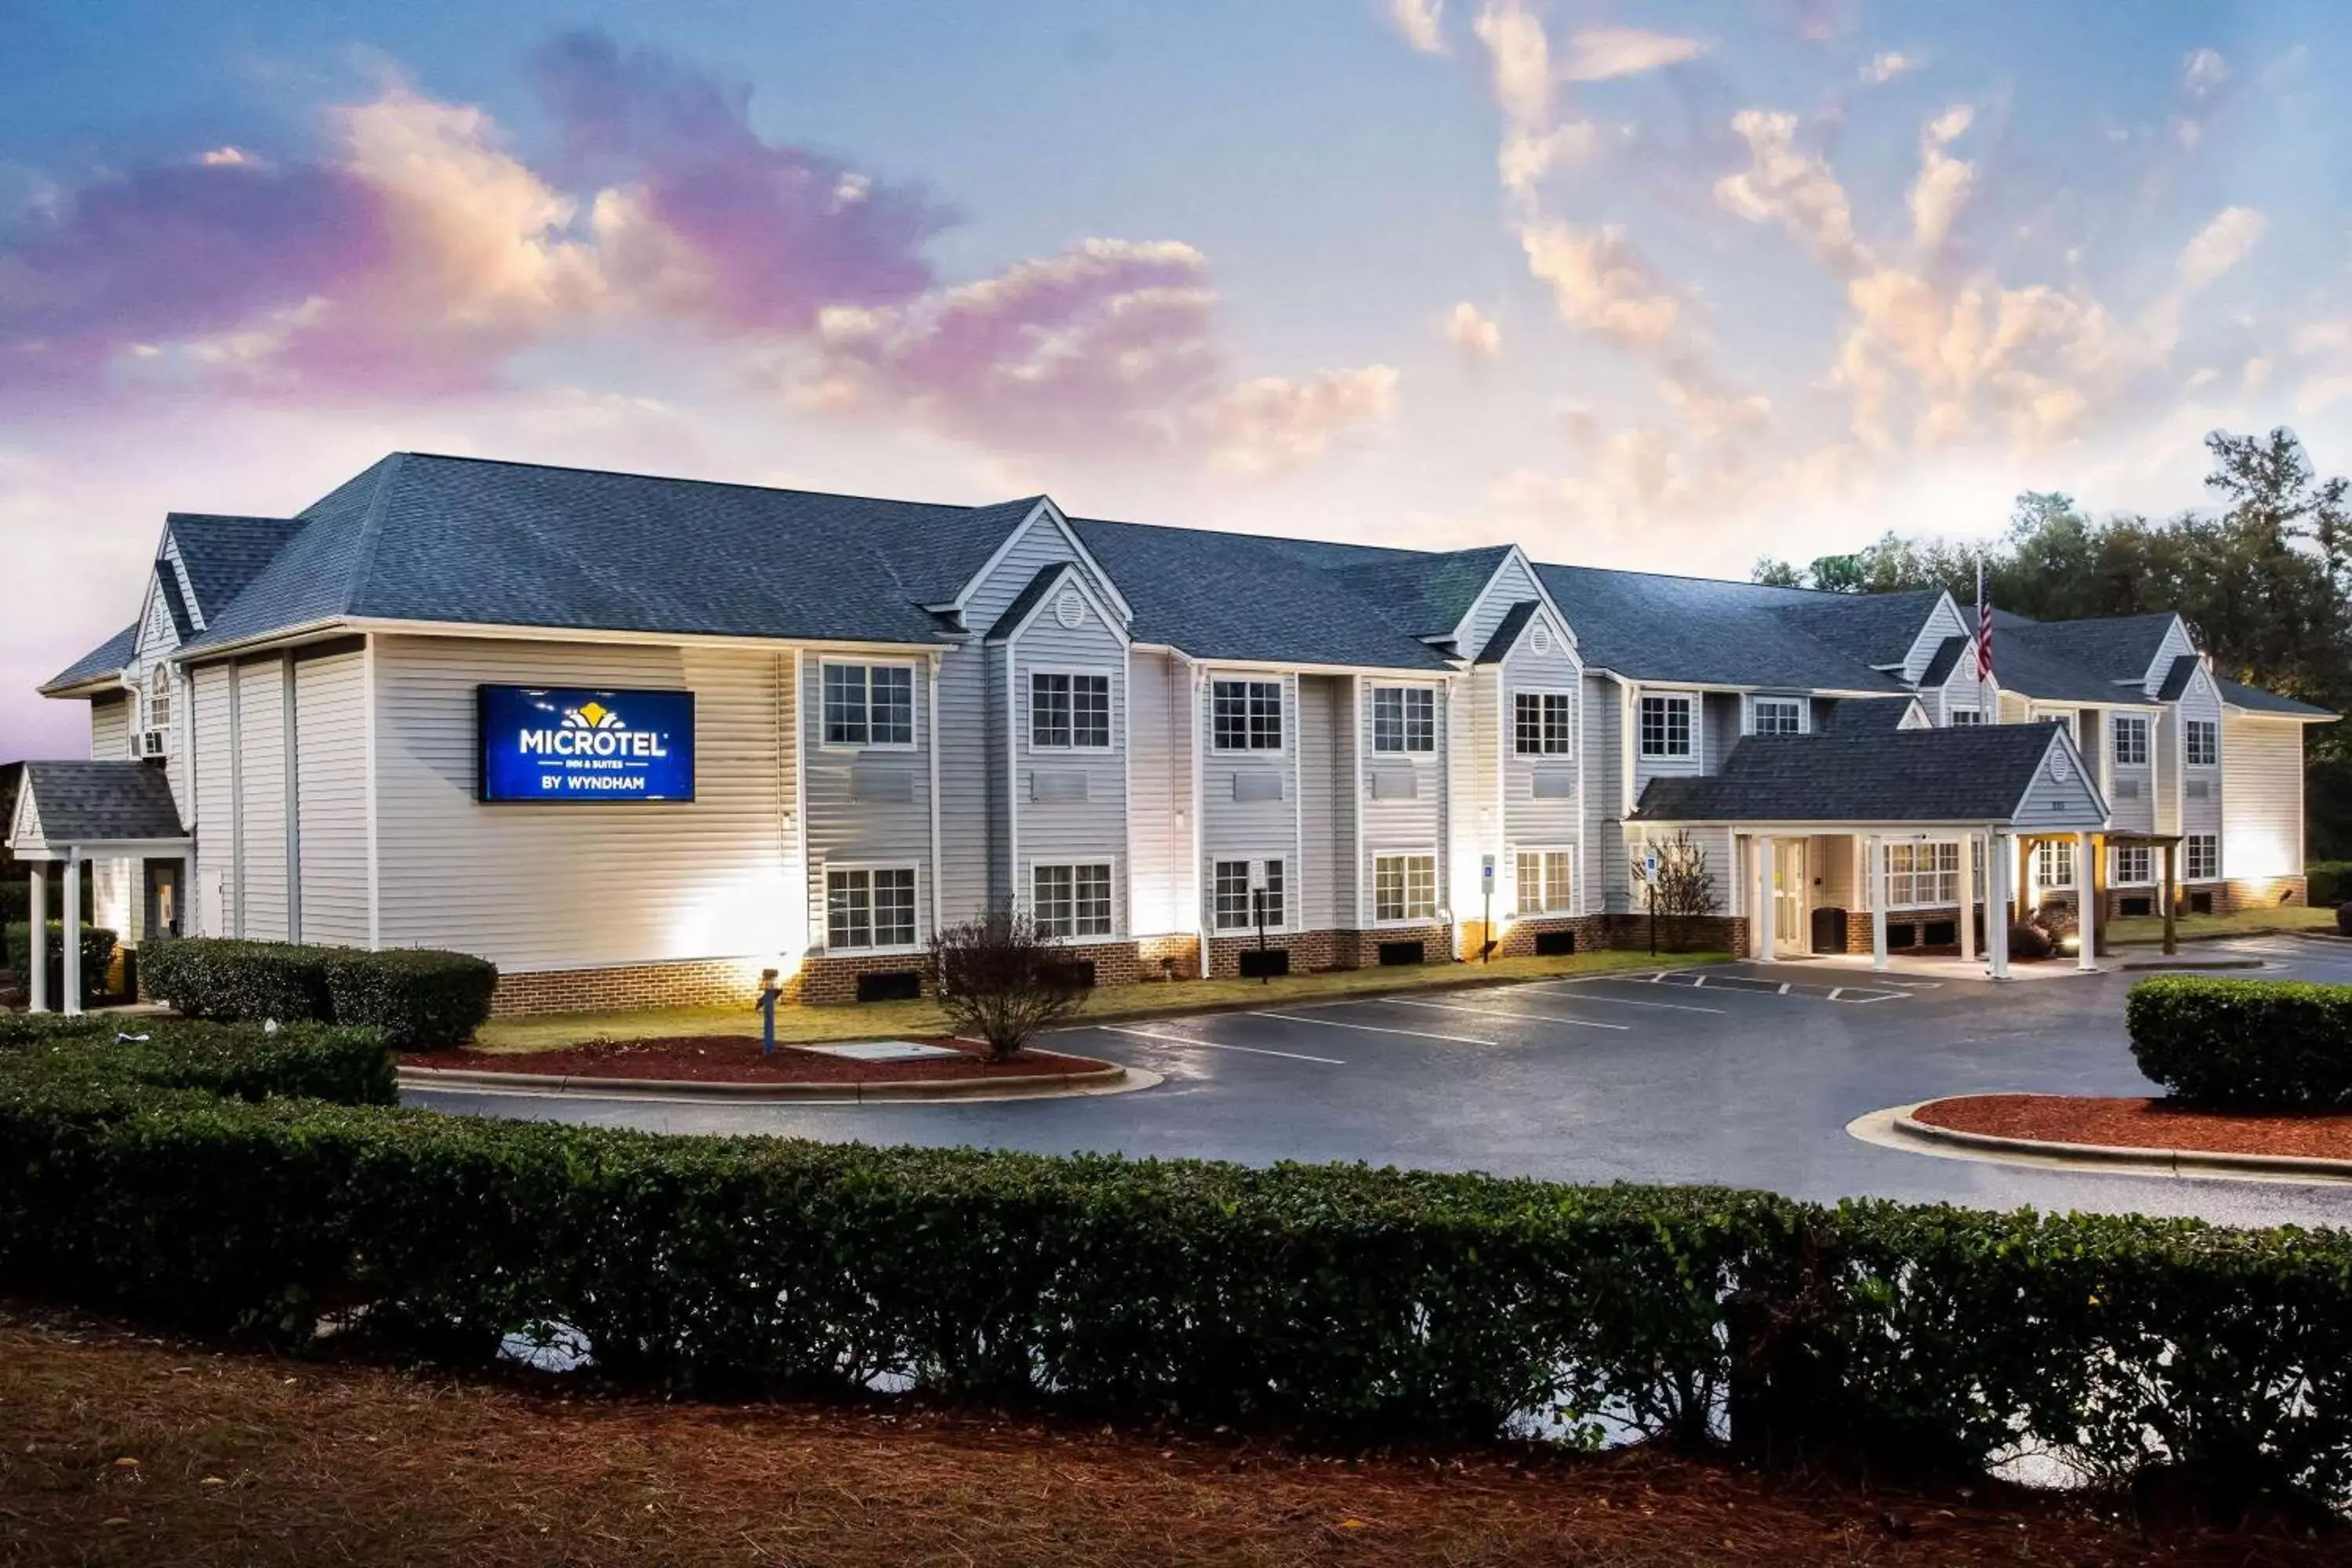 Property Building in Microtel Inn & Suites by Wyndham Southern Pines Pinehurst